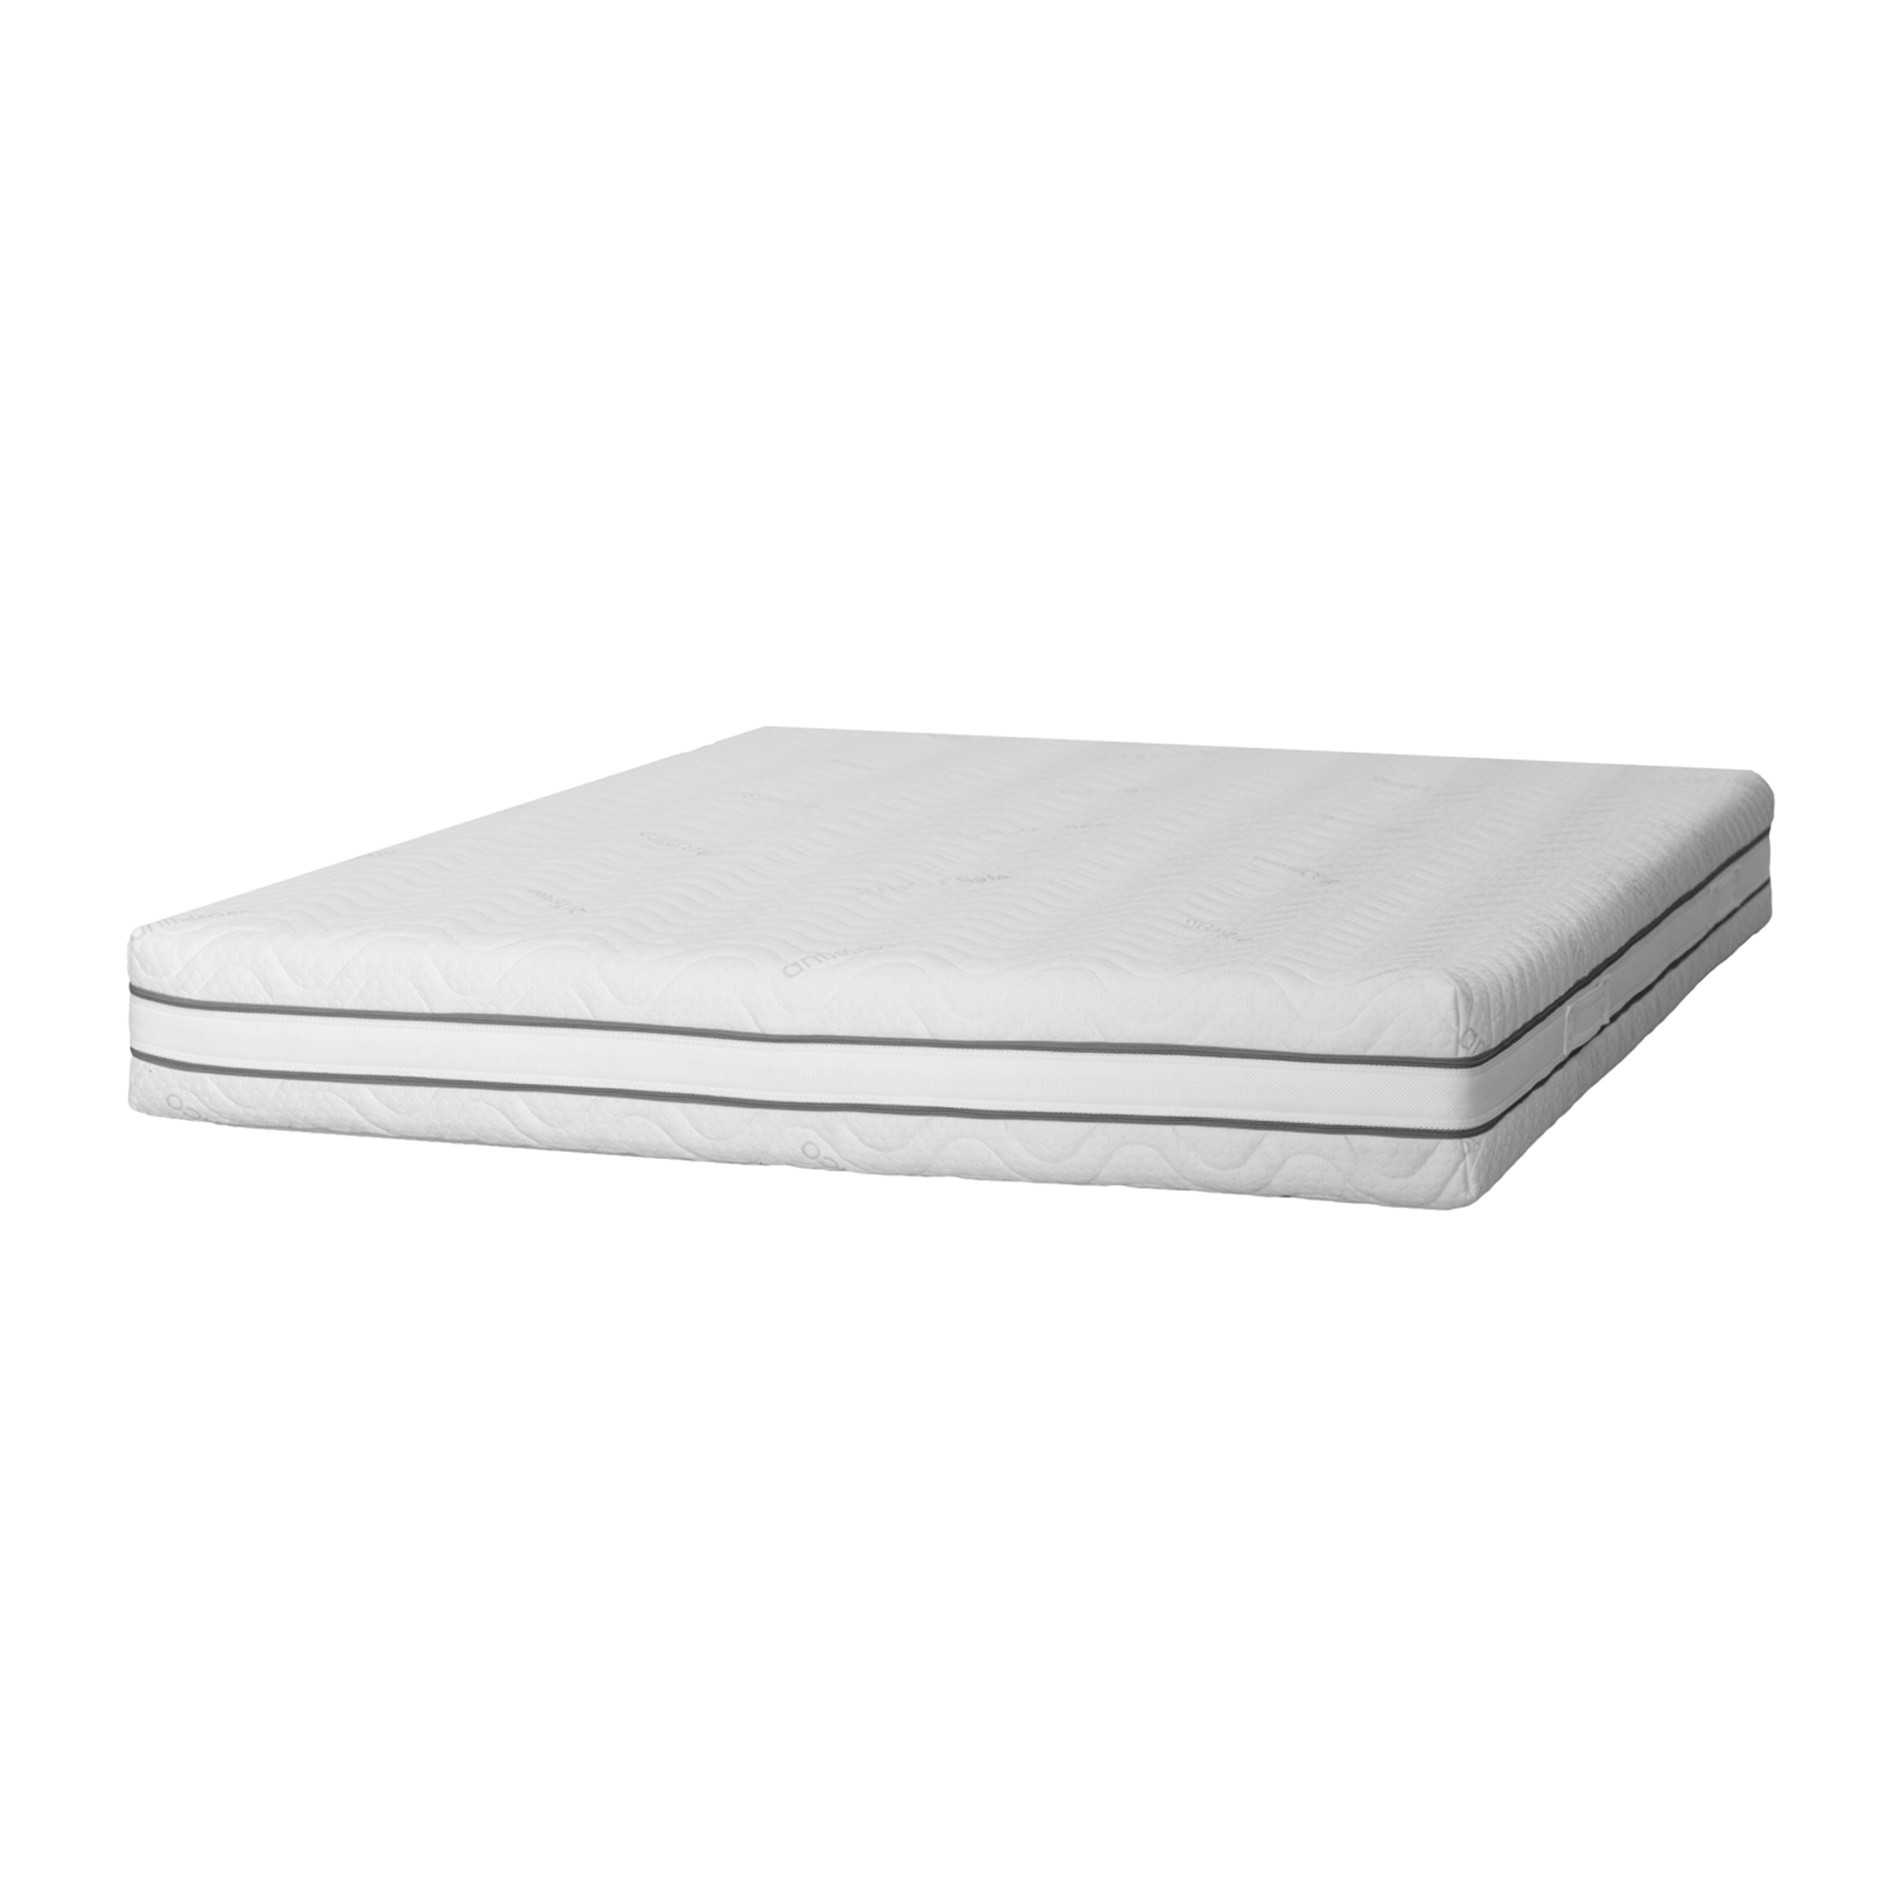 Two-season mattress with removable cover, White, large image number 0